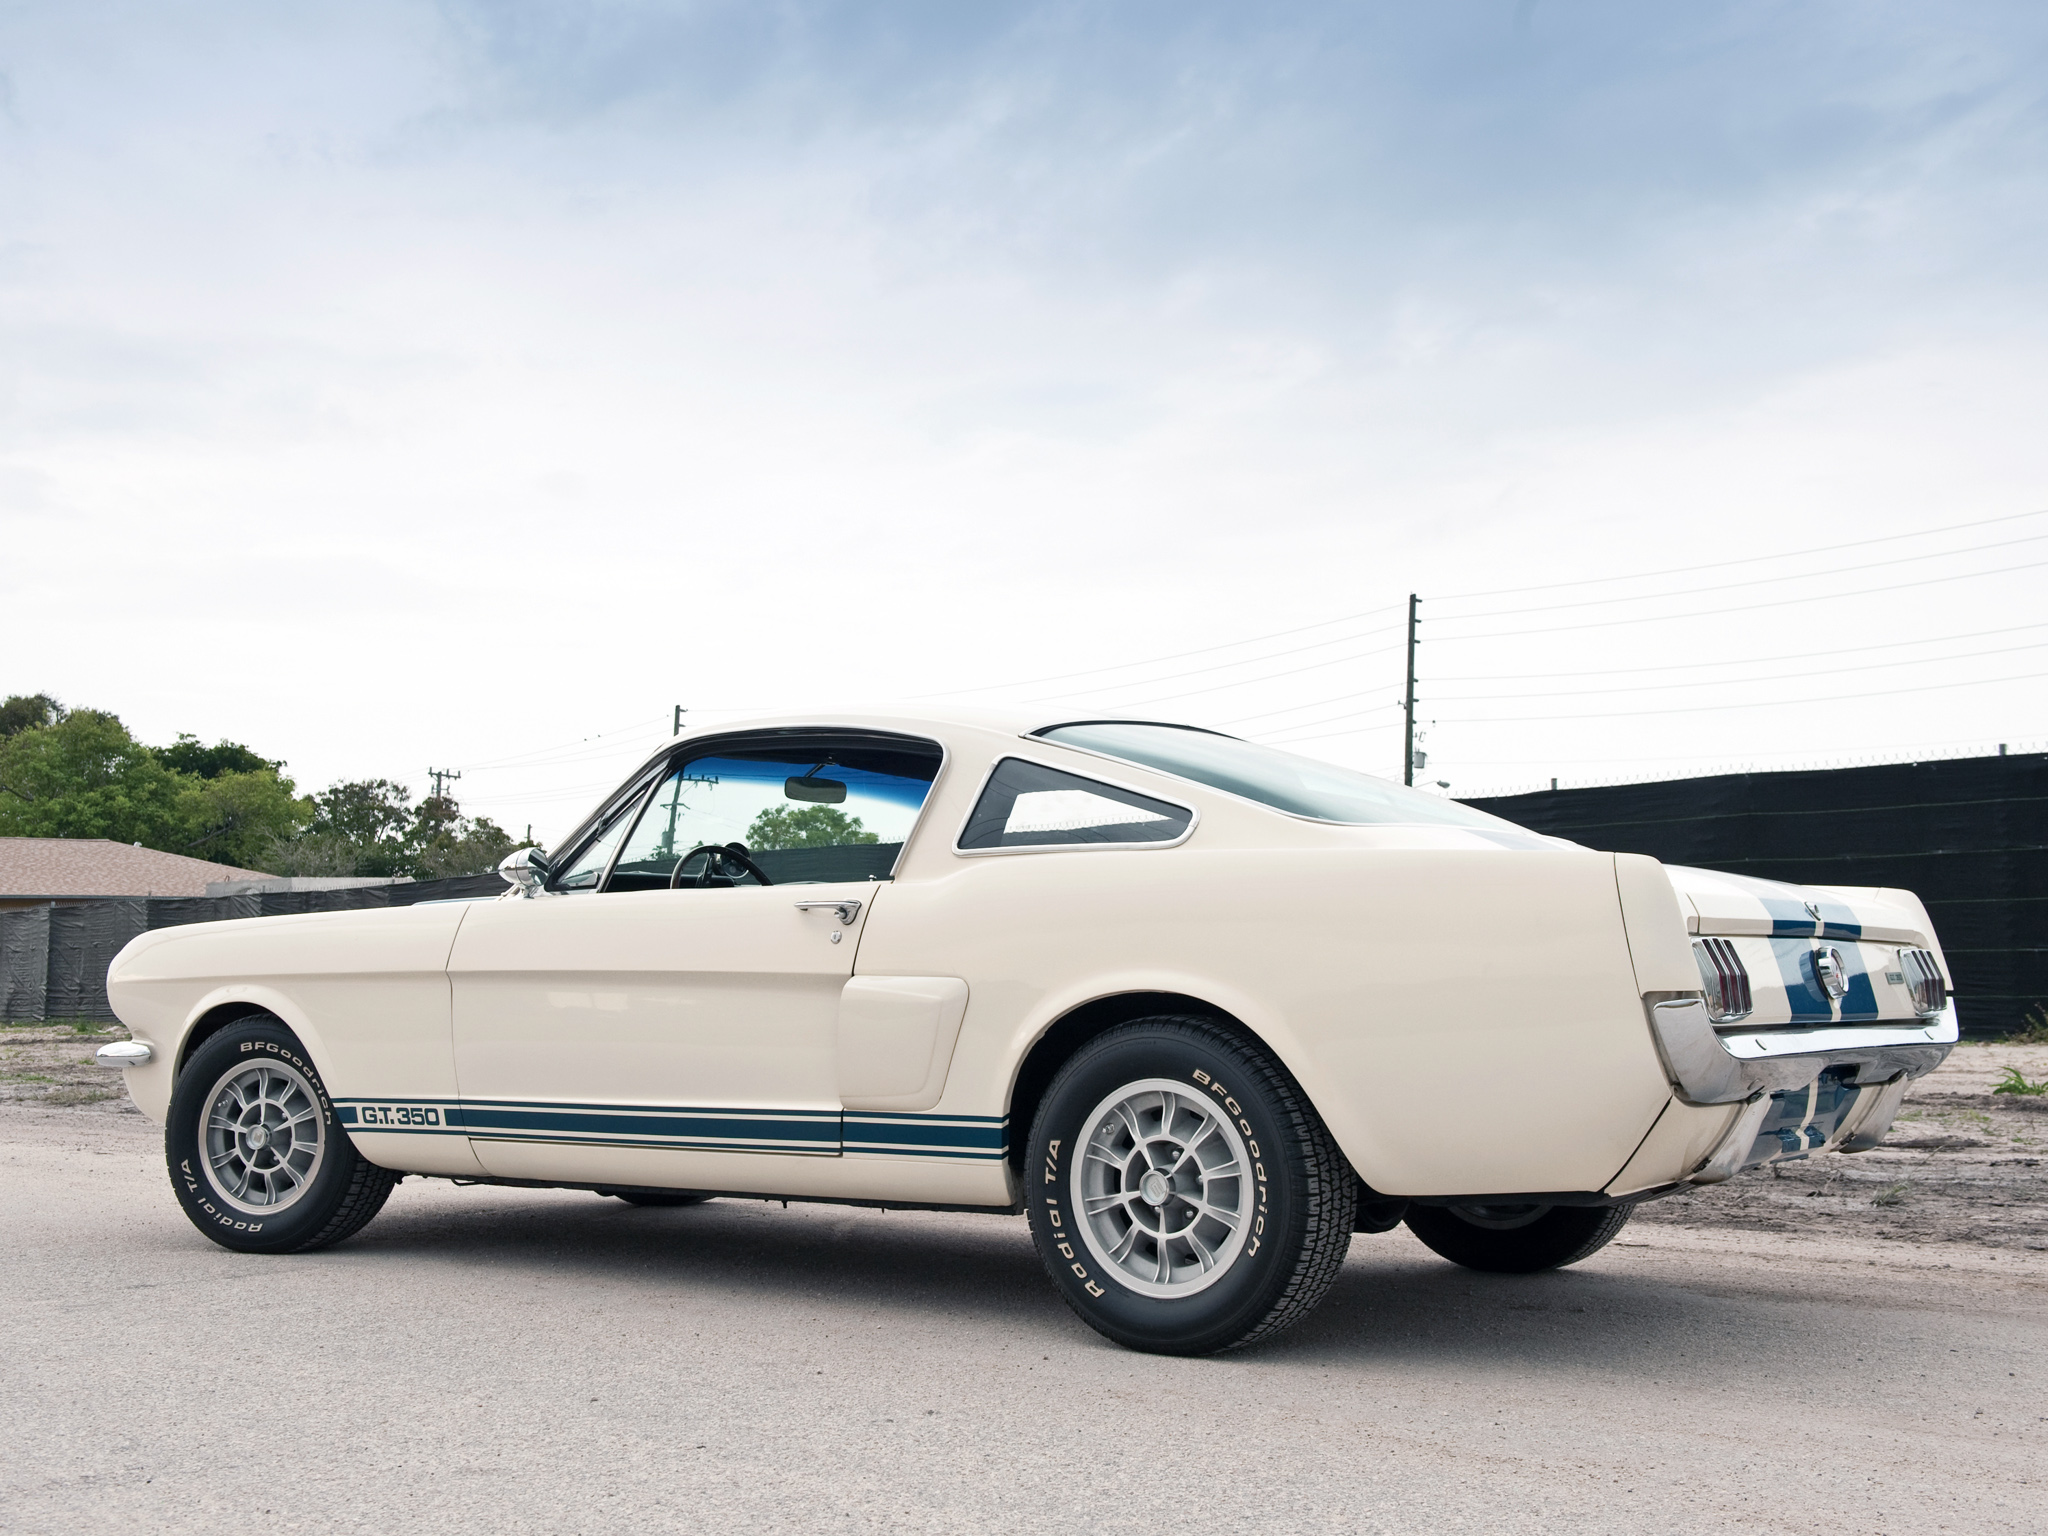 Shelby Gt350 Ford Mustang Classic Wallpaper Background